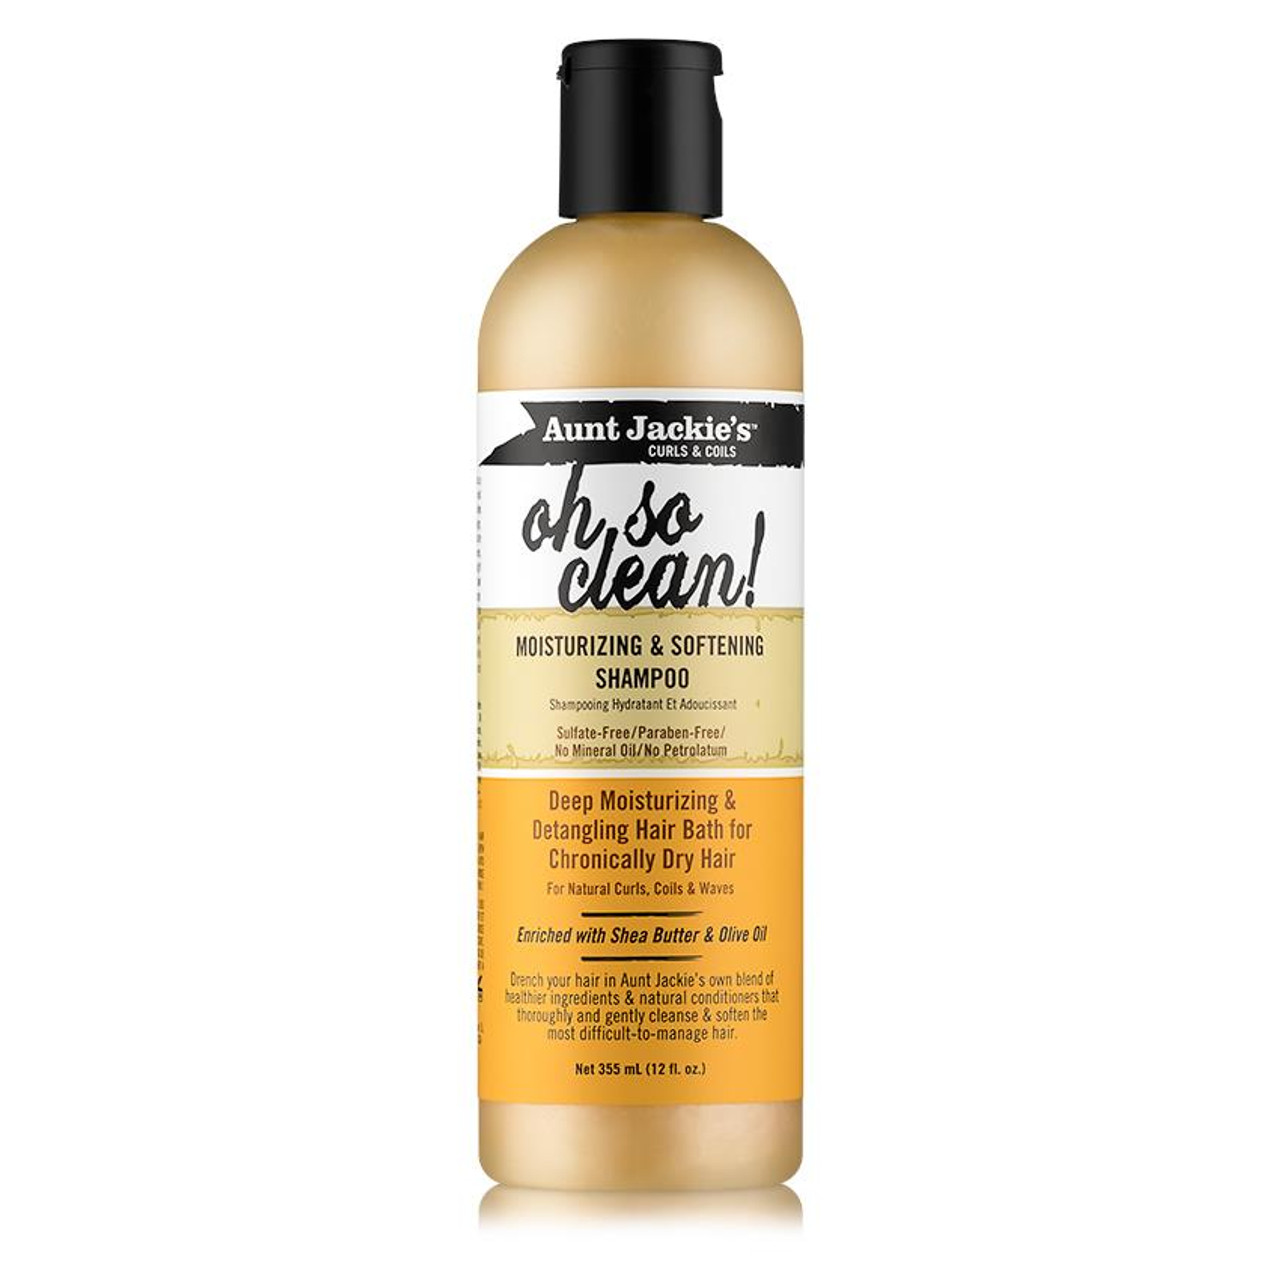 Aunt Jackie's Curls & Coils Oh So Clean! Moisturizing & Softening Shampoo  (12 oz.) - NaturallyCurly